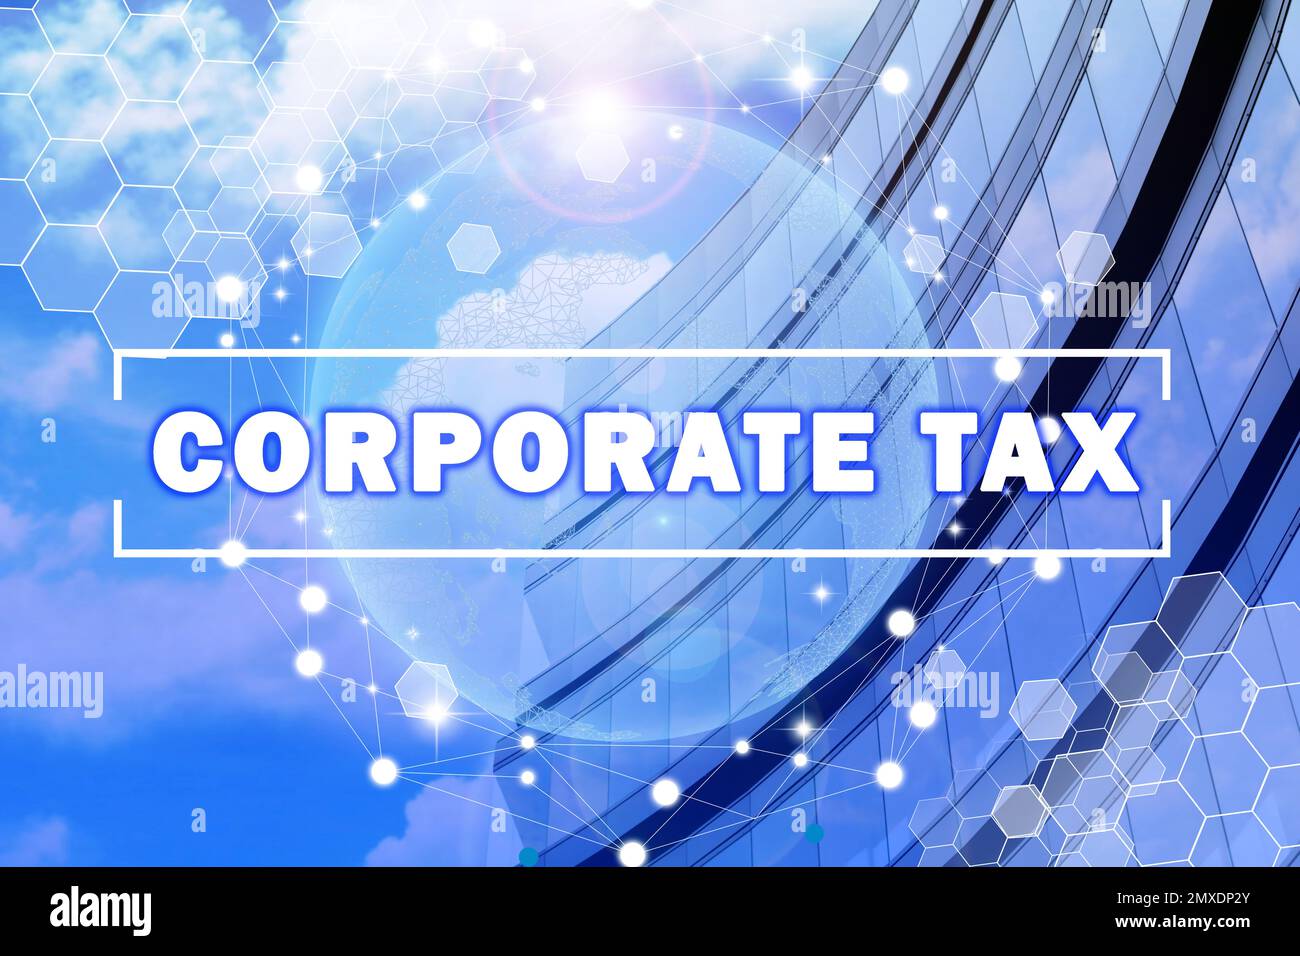 Corporate tax concept. Modern office building with tinted windows outdoors Stock Photo